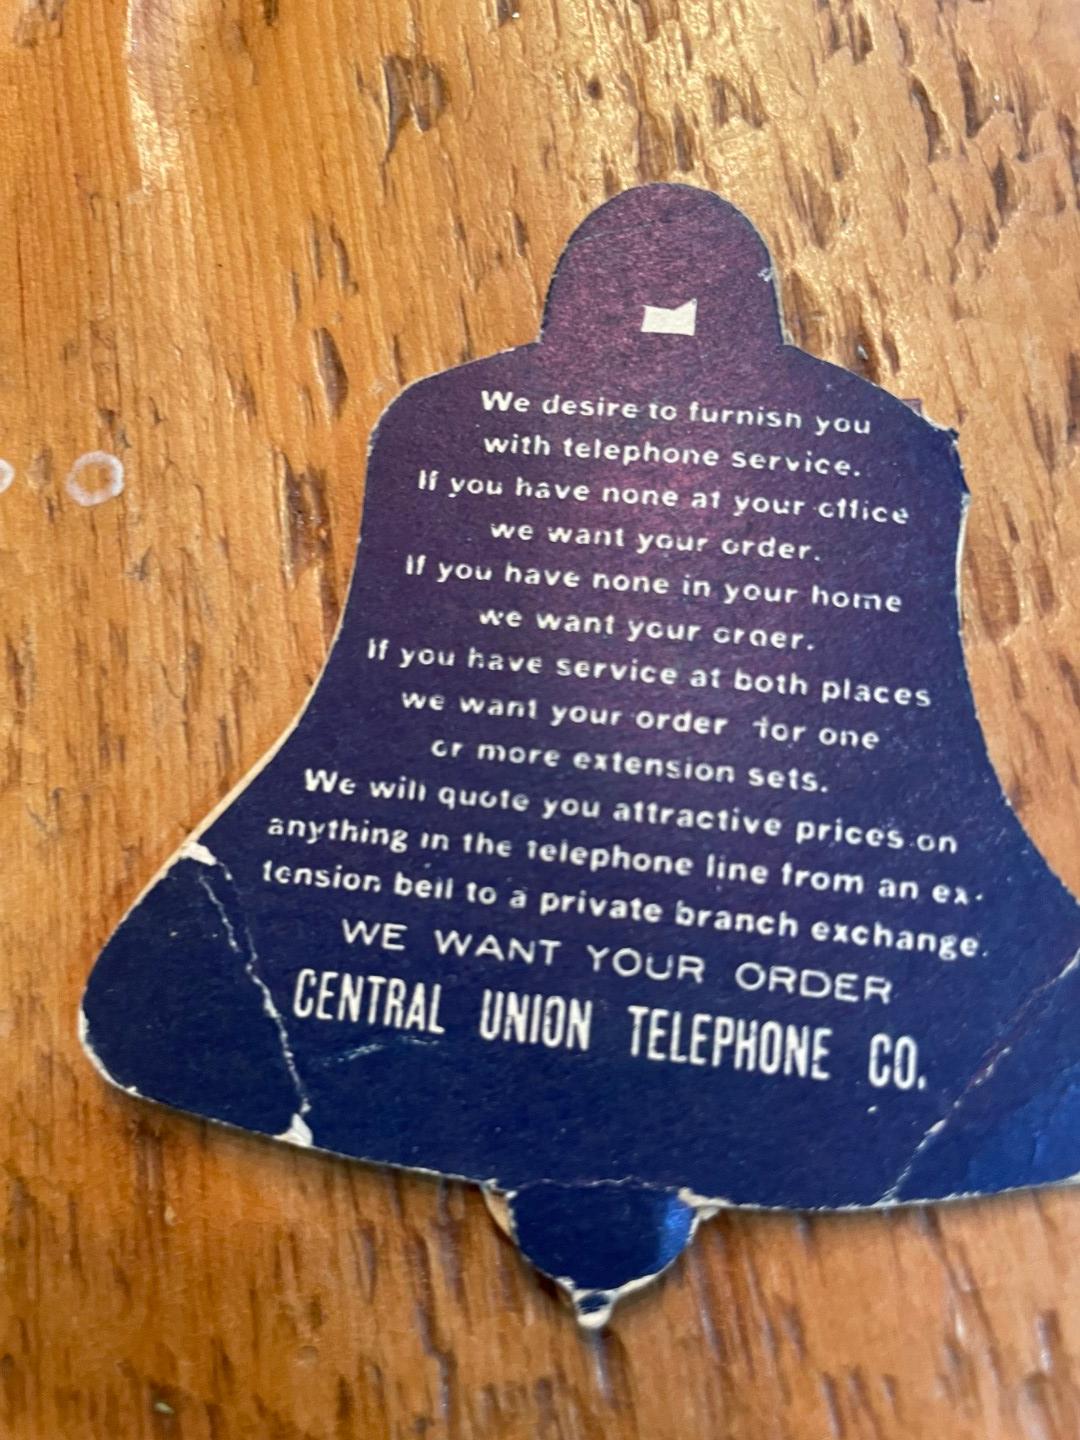 Central Union Telephone Co. promotional advertising